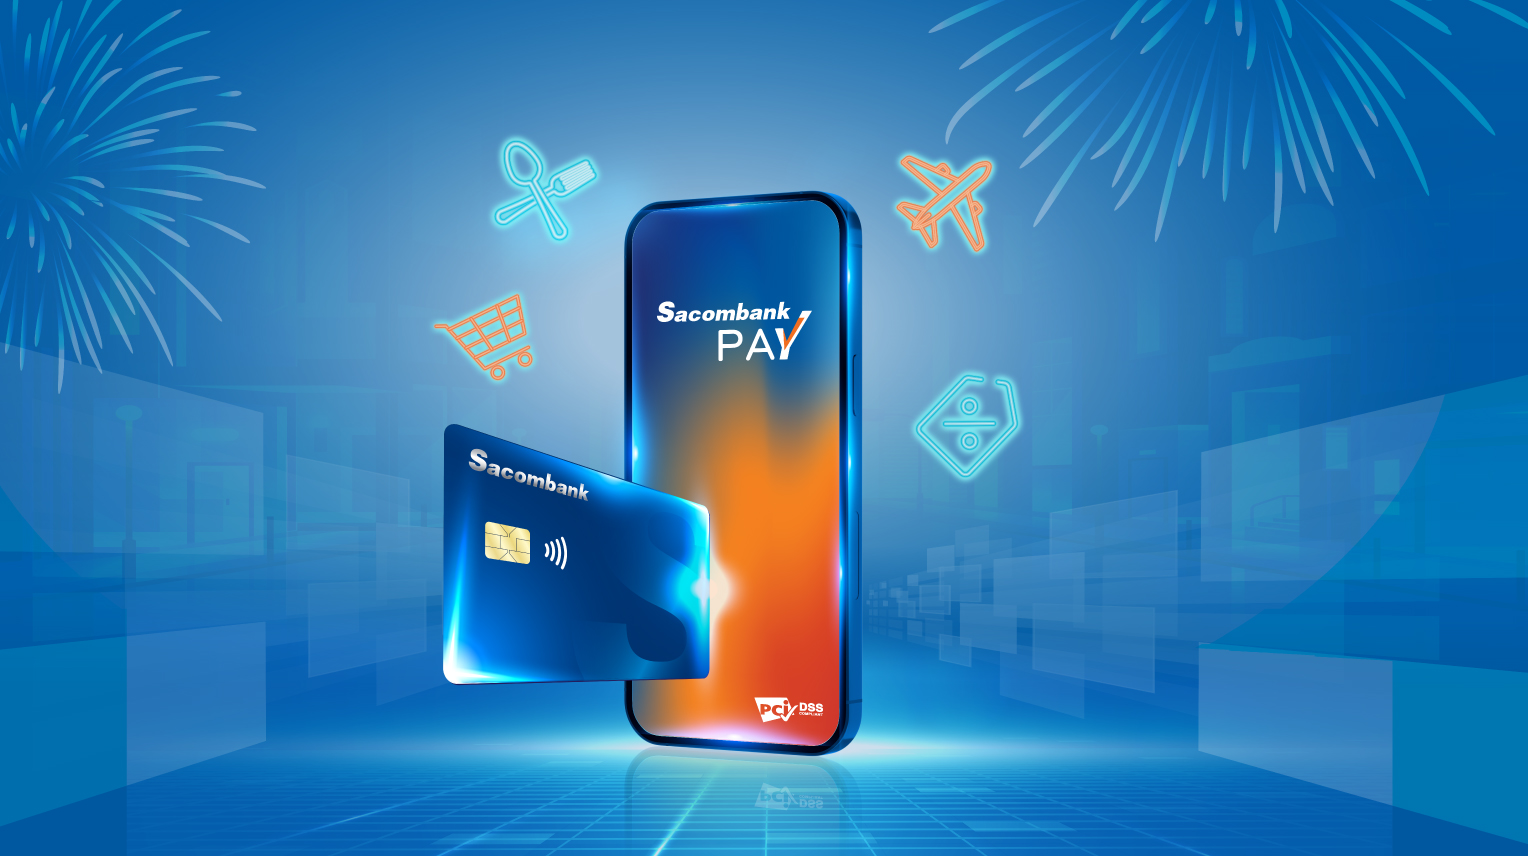 Sacombank launches “Super Hot” deals to celebrate national holidays